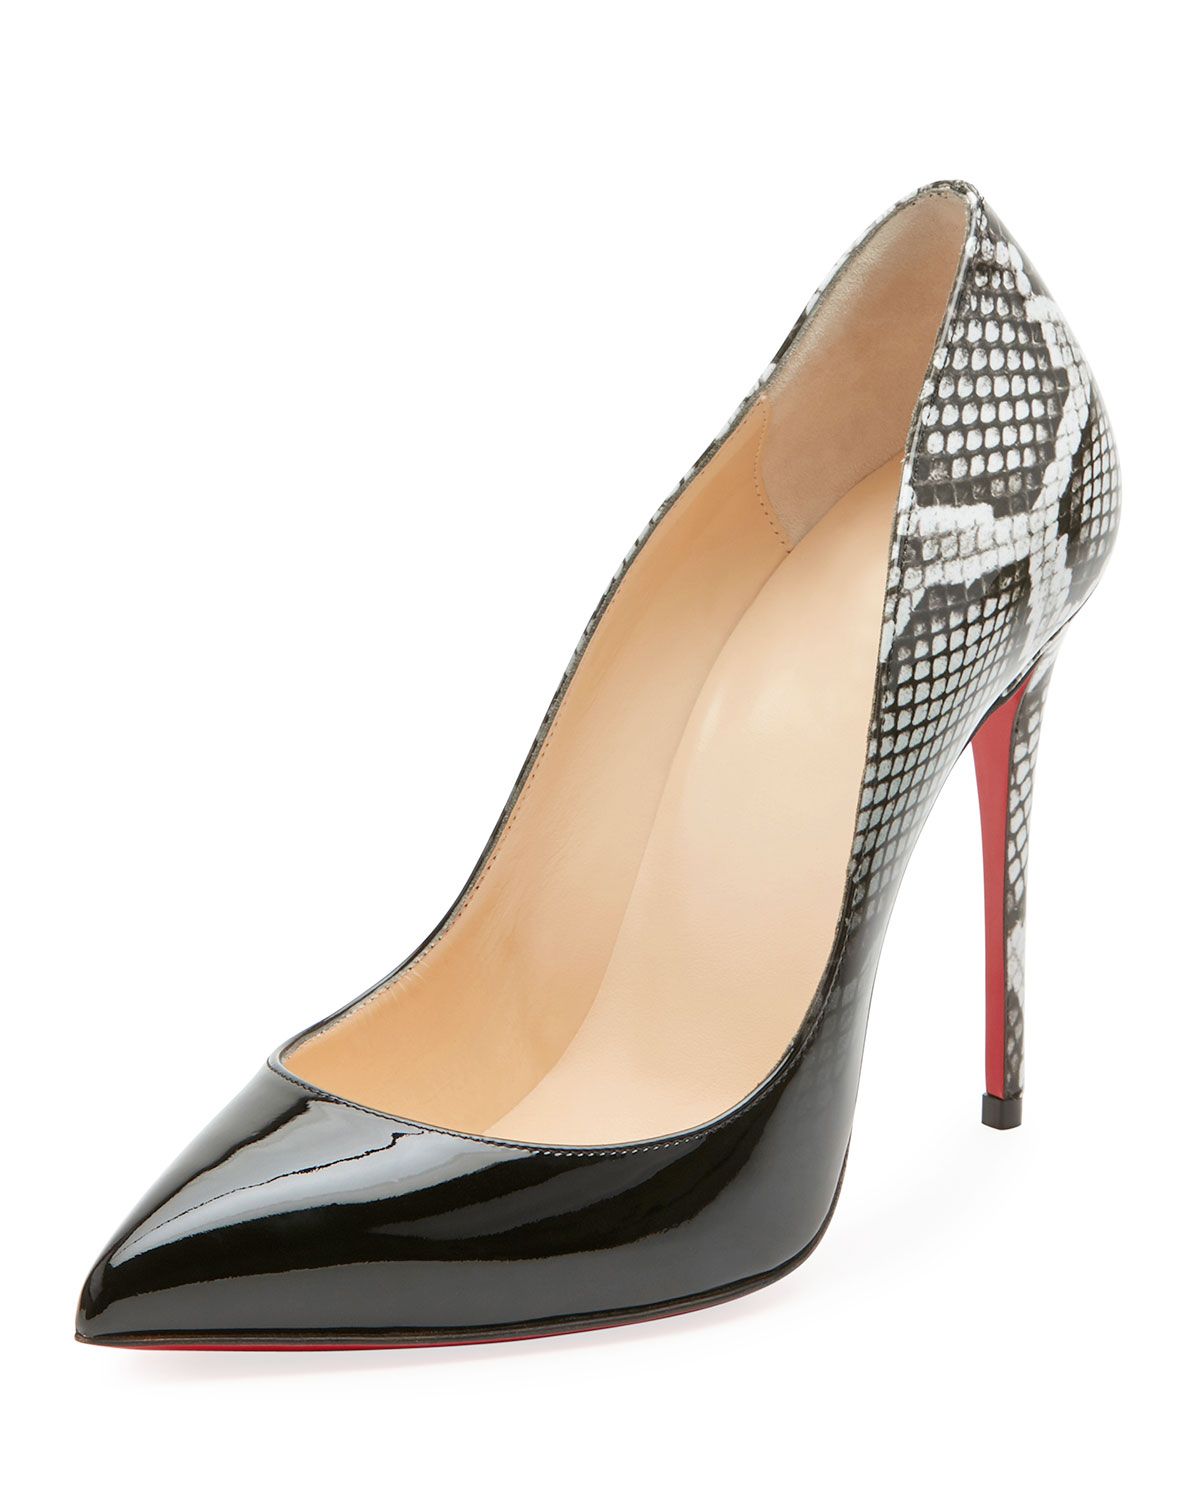 Pigalle Follies Ombre Snake-Print Red Sole Pump | Neiman Marcus